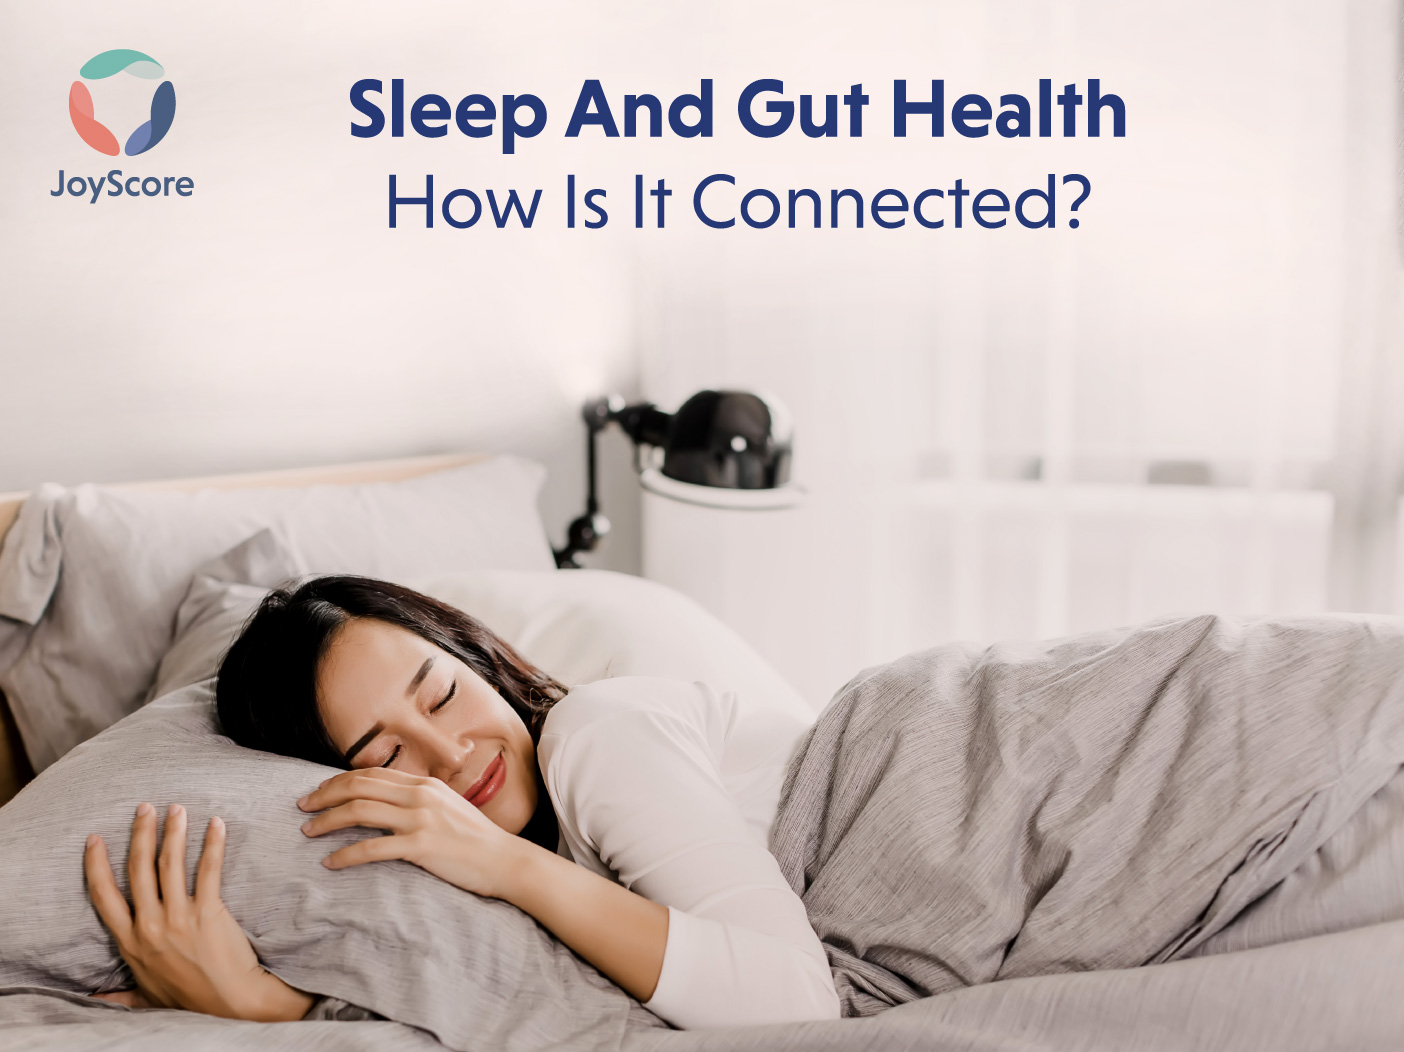 Sleep and Gut Health- How is it Connected?